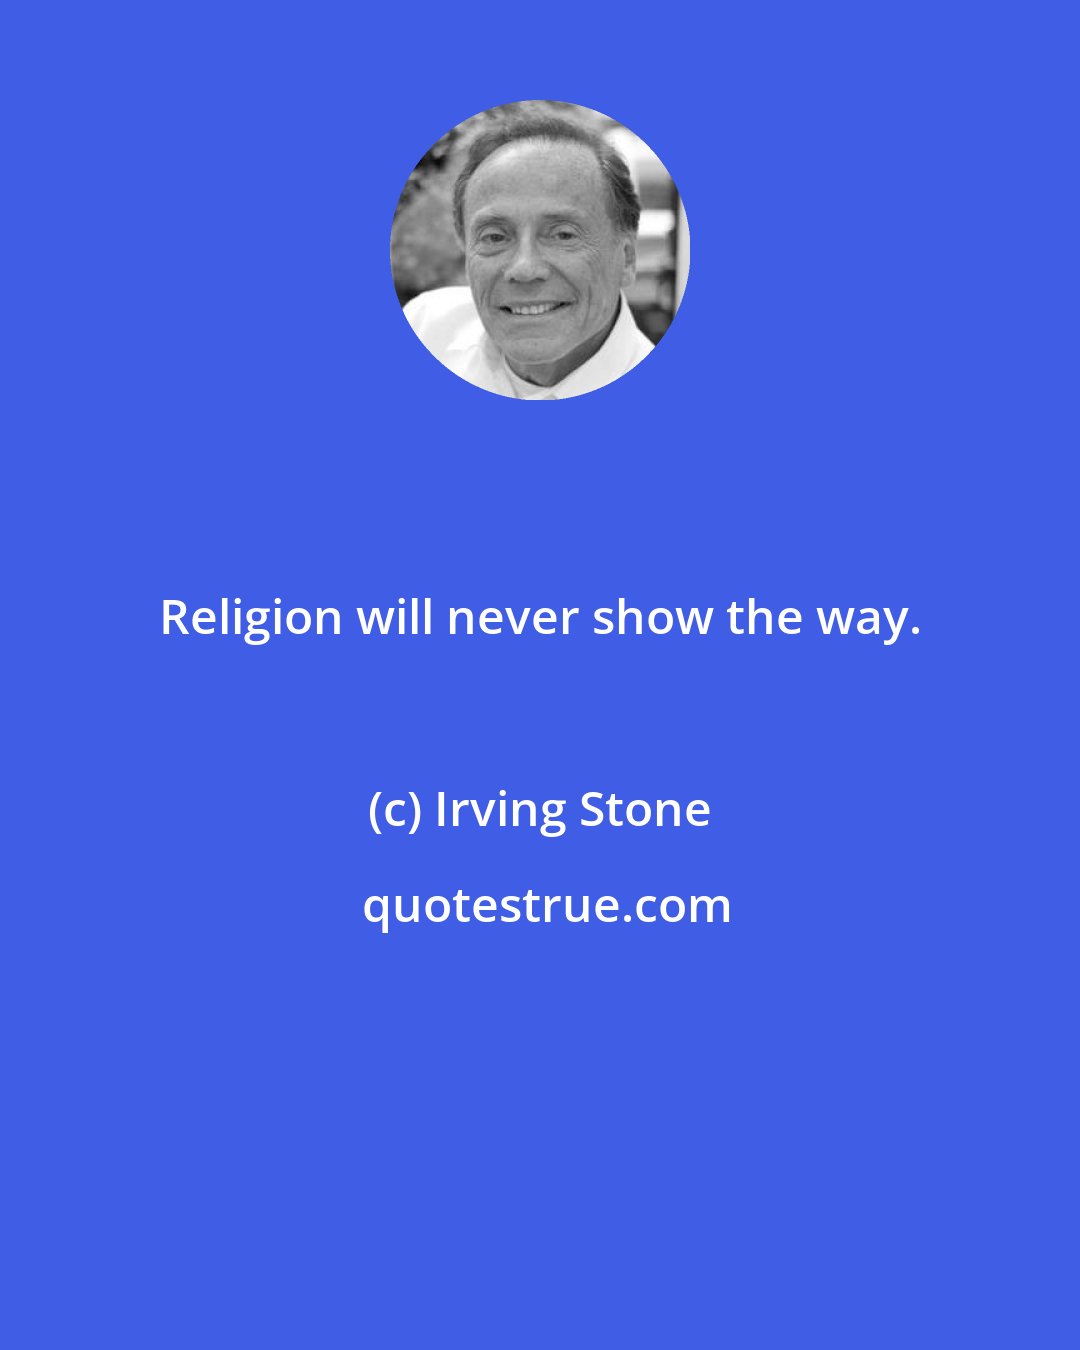 Irving Stone: Religion will never show the way.